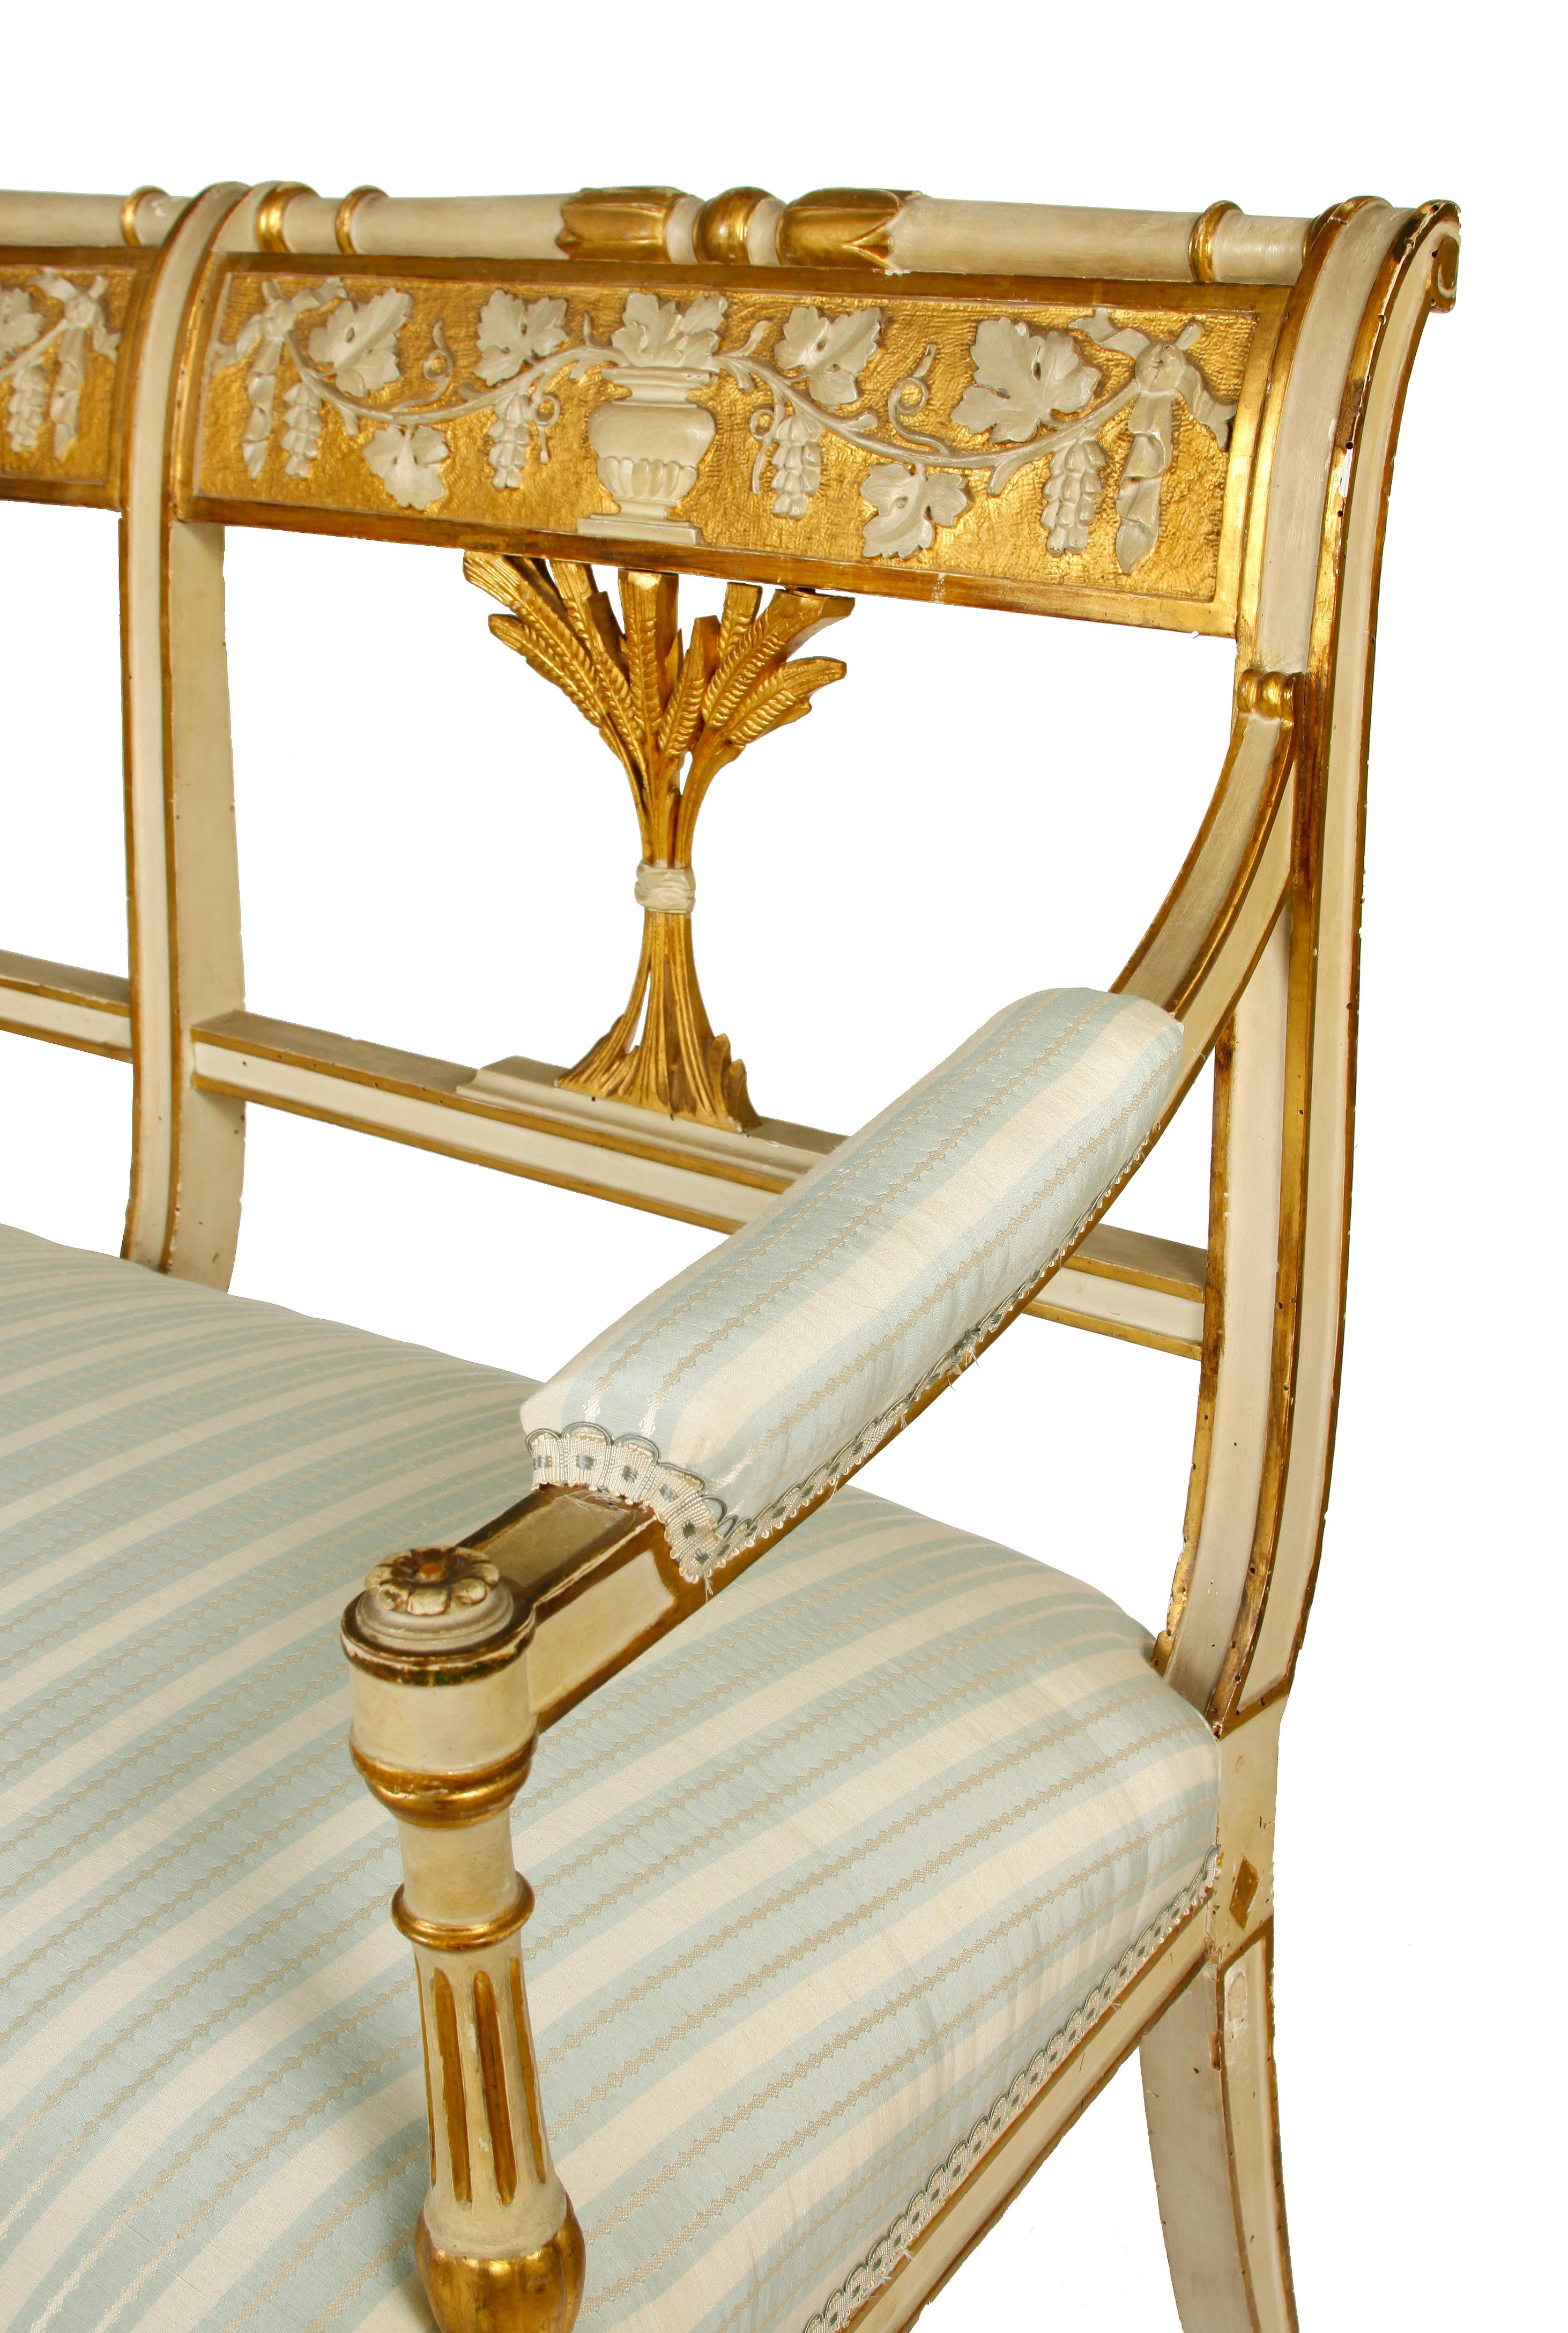 Antique Italian painted and gilt settee. Louis XVI style circa 1900 with carved back depicting wheat, grapes and vines. Newly reupholstered in blue and cream striped fabric.